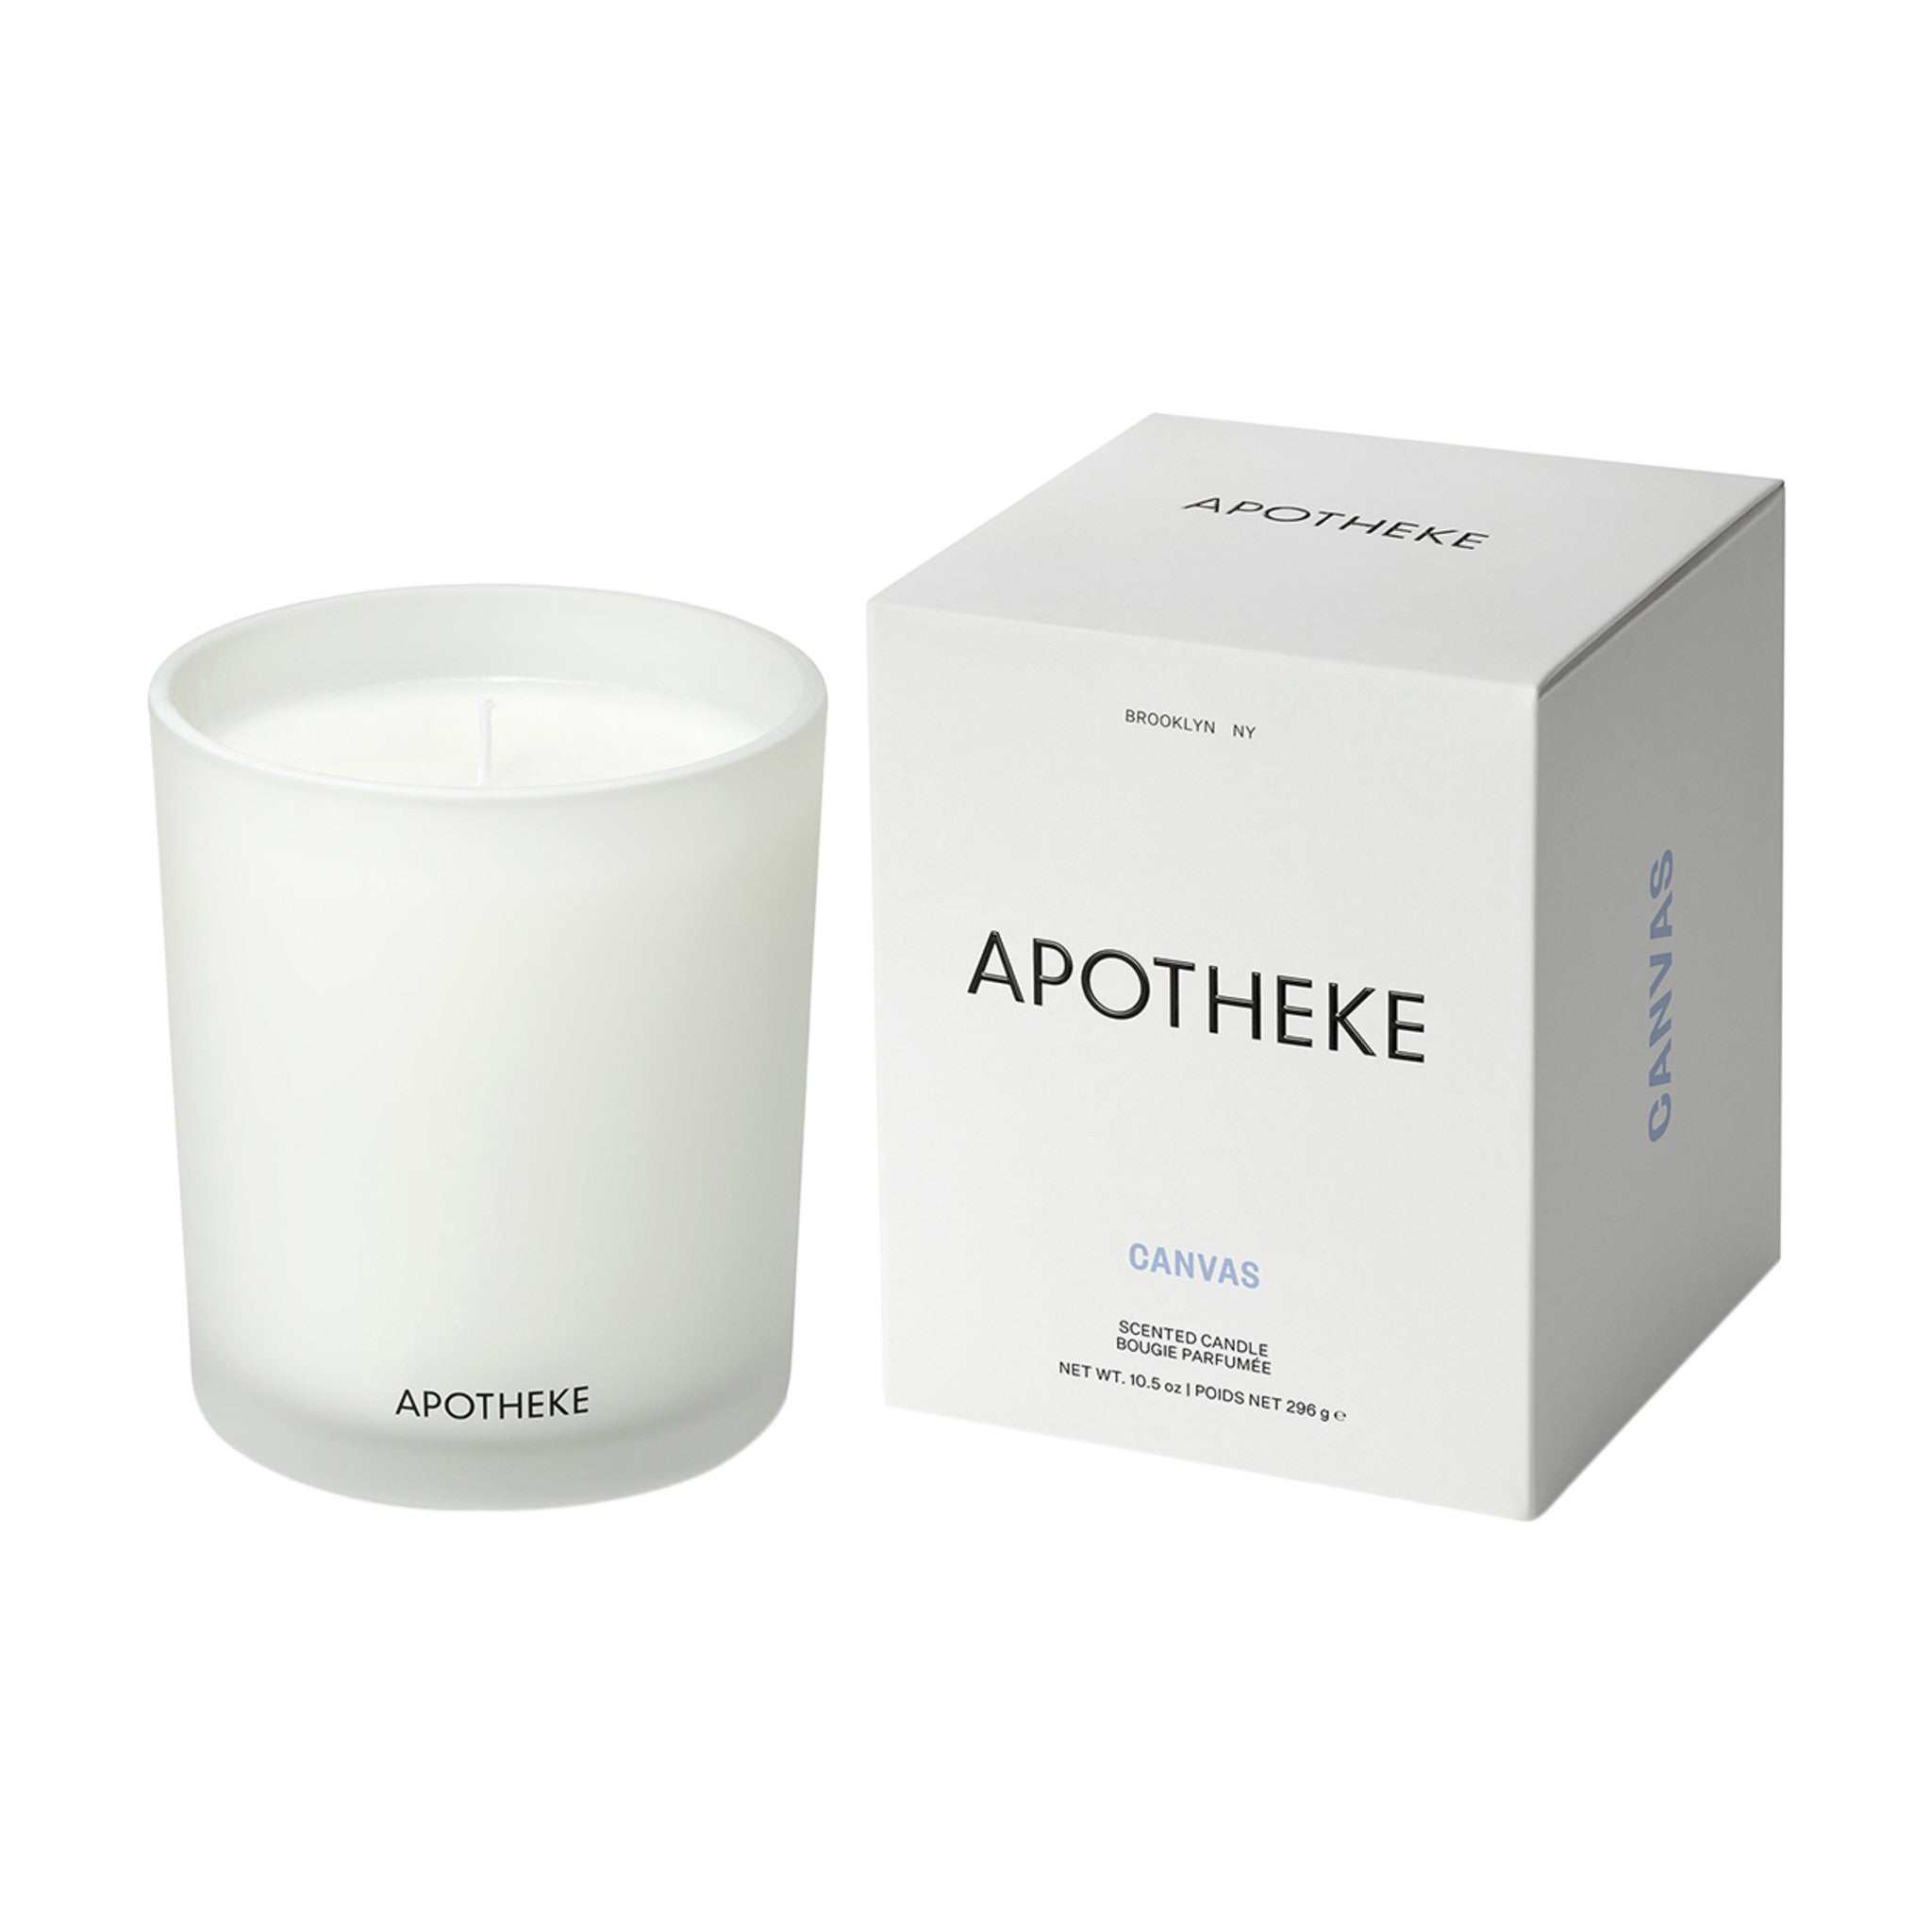 Apotheke Canvas Classic Scented Candle main image.